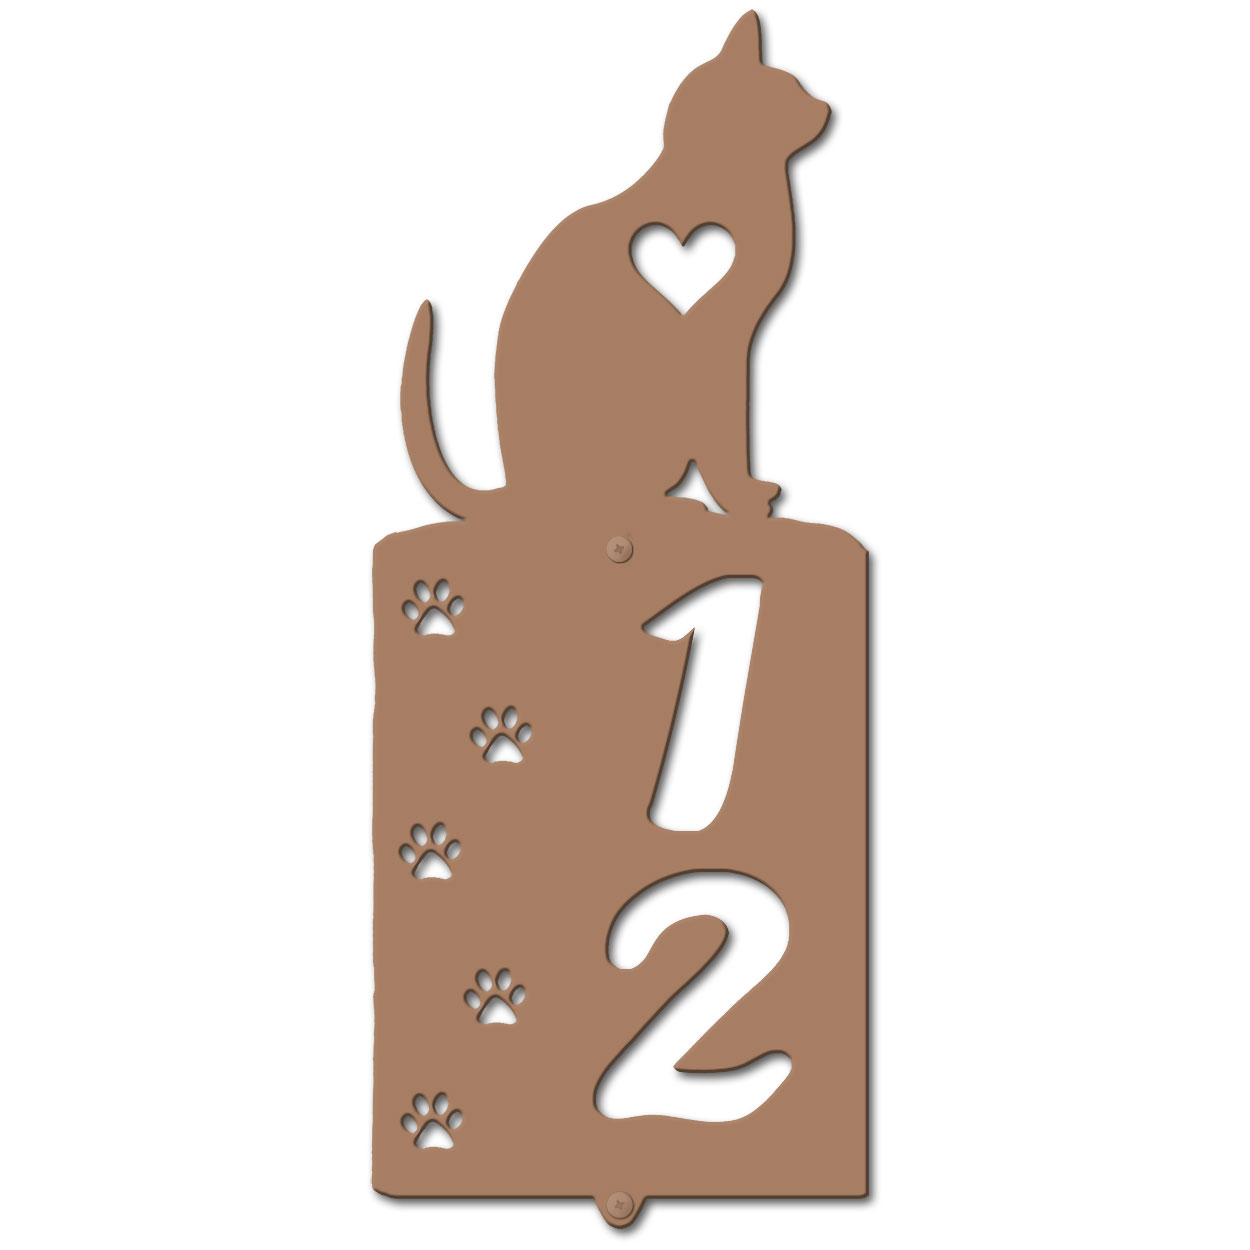 636362 - Cat Tracks Cut Outs Two Digit Address Number Plaque